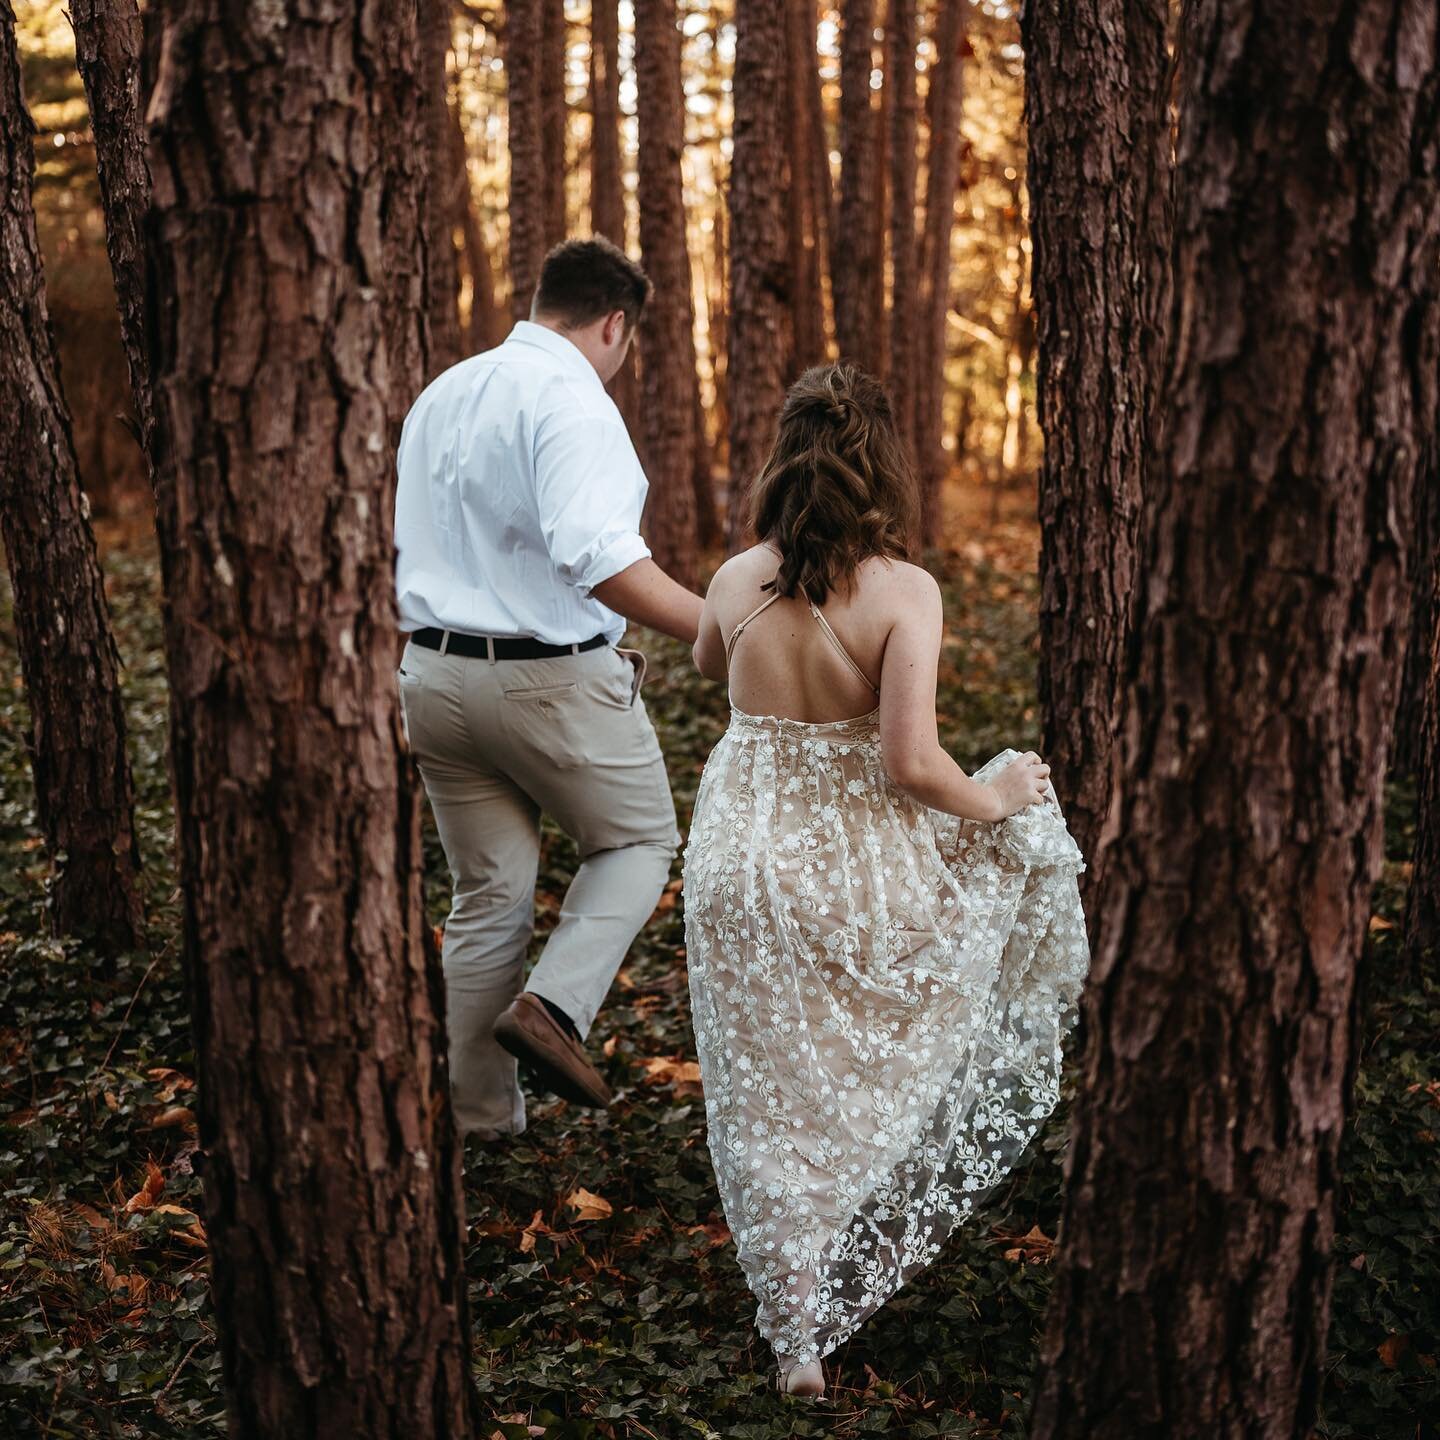 Moss covered tree trunks 
And sunsets through pine trees

Whispers and flirting
While crunching through fall leaves

Brides who love showing their engagement rings&hellip;

These are a few of my favorite things. 🤍